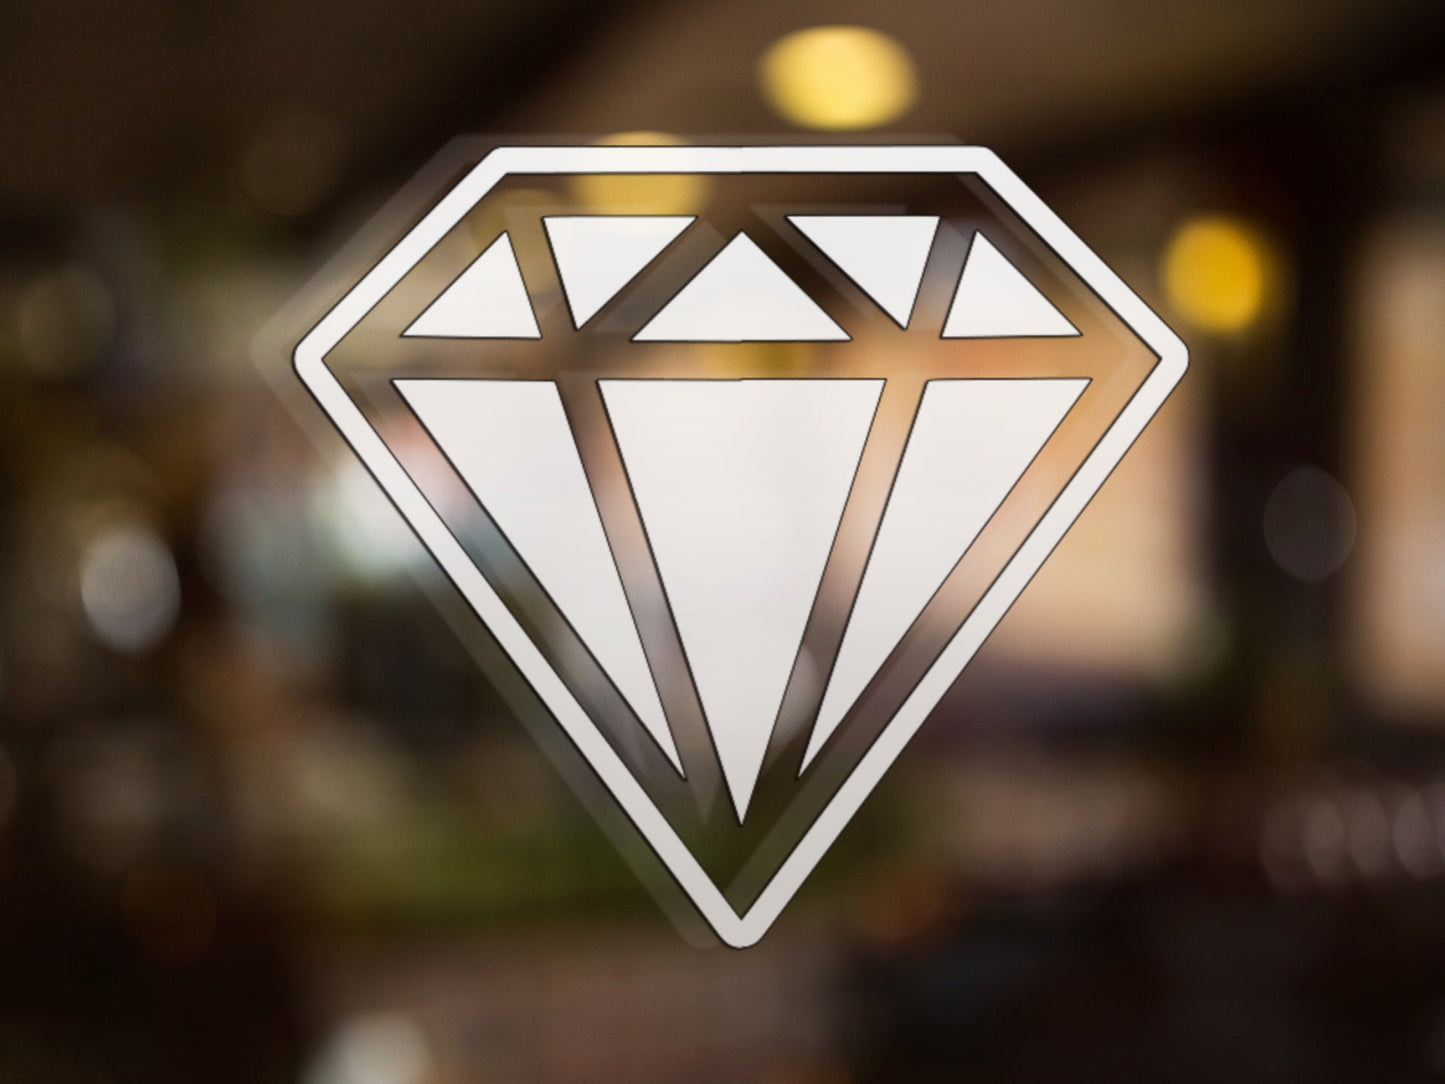 Diamond Decal - Many Colors & Sizes